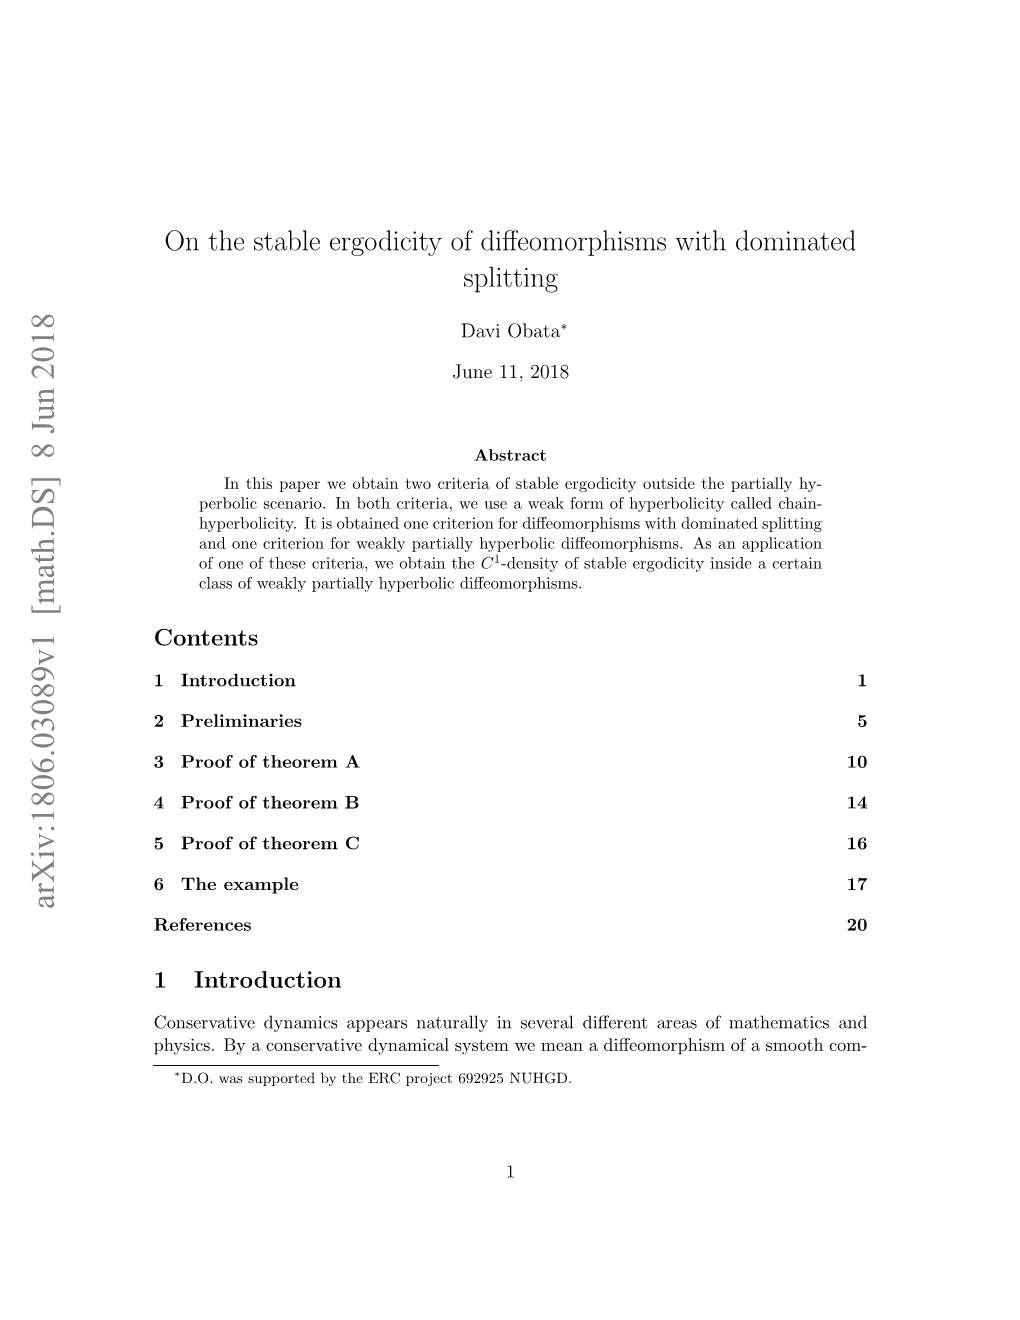 On the Stable Ergodicity of Diffeomorphisms with Dominated